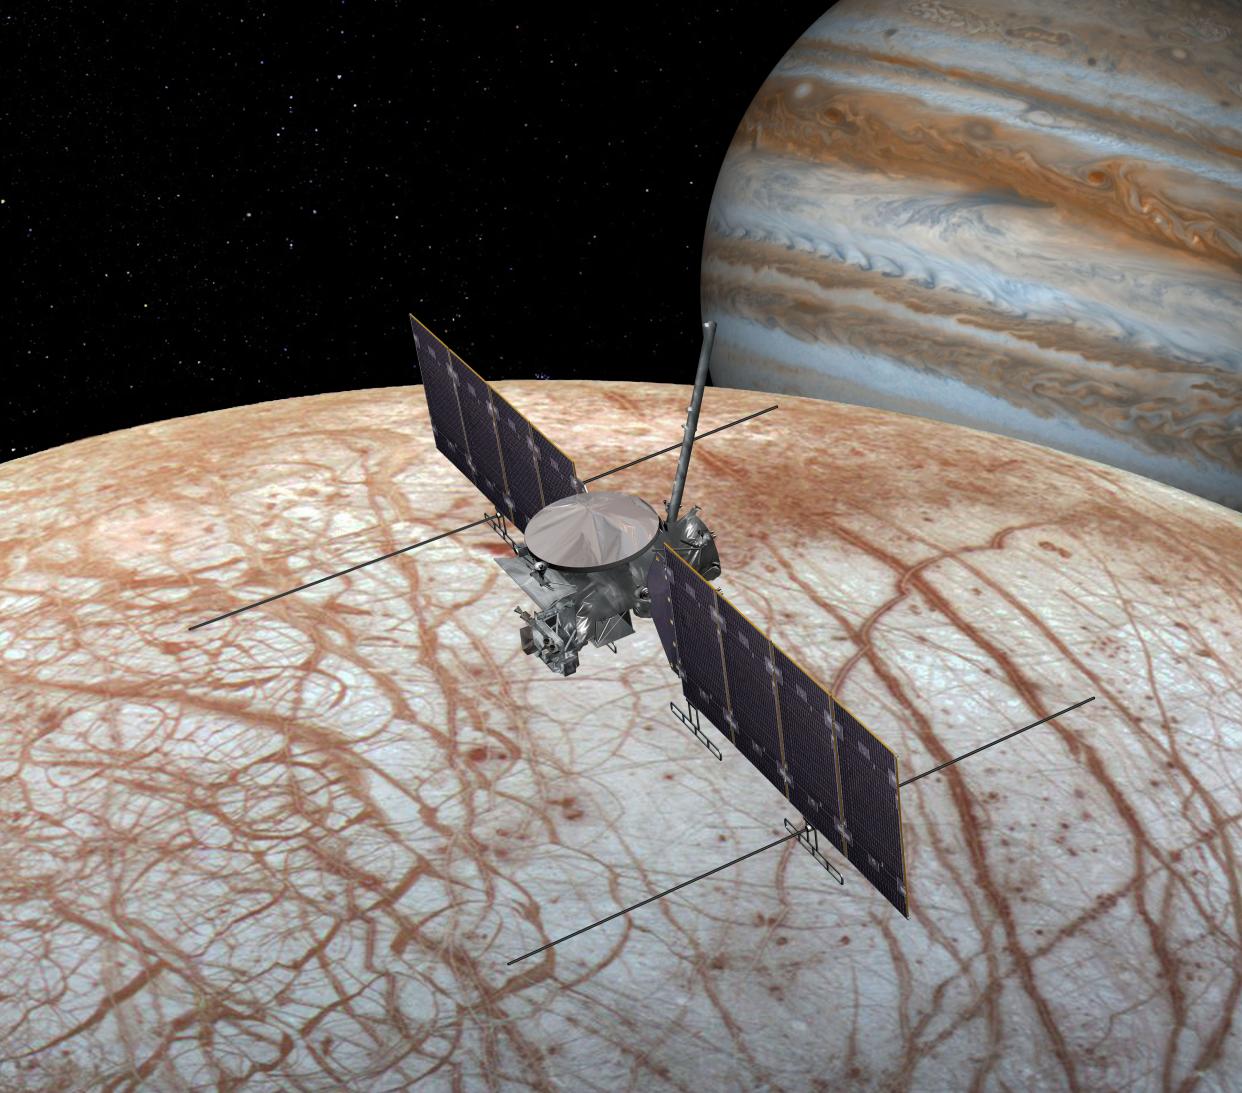 This artist's rendering shows NASA's Europa mission spacecraft, which will investigate the potential habitability of one of Jupiter's ice-covered ocean world moons.